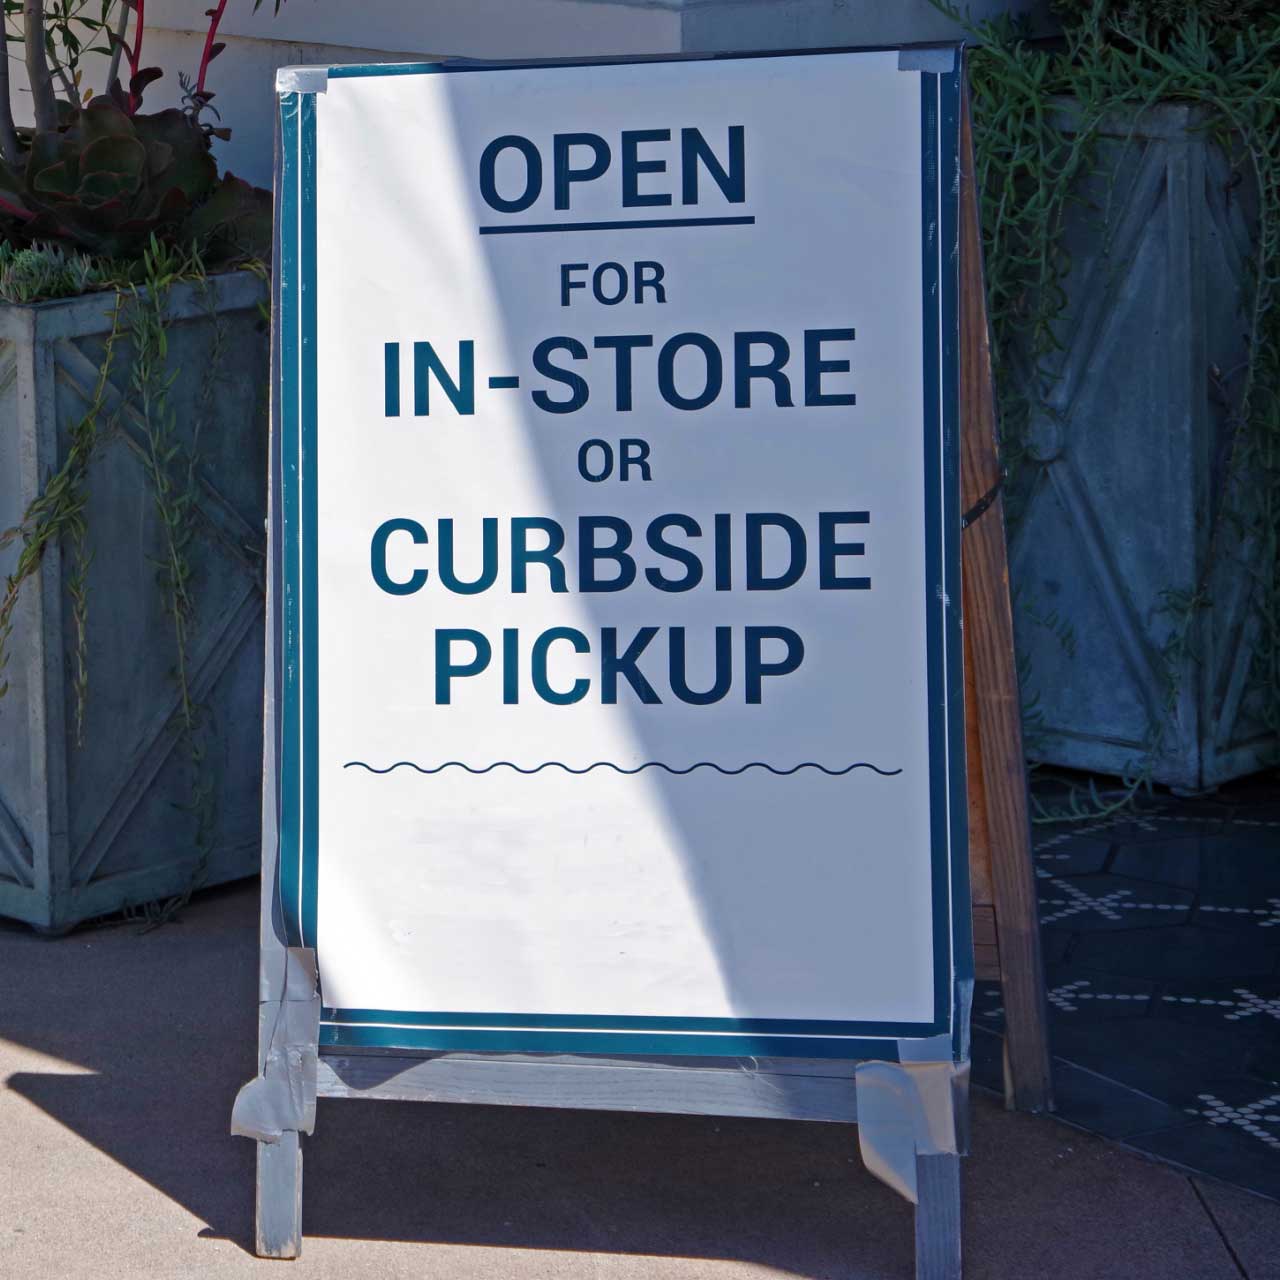 Cannabis dispensary store sign saying “Open for in-store or curbside pickup.”